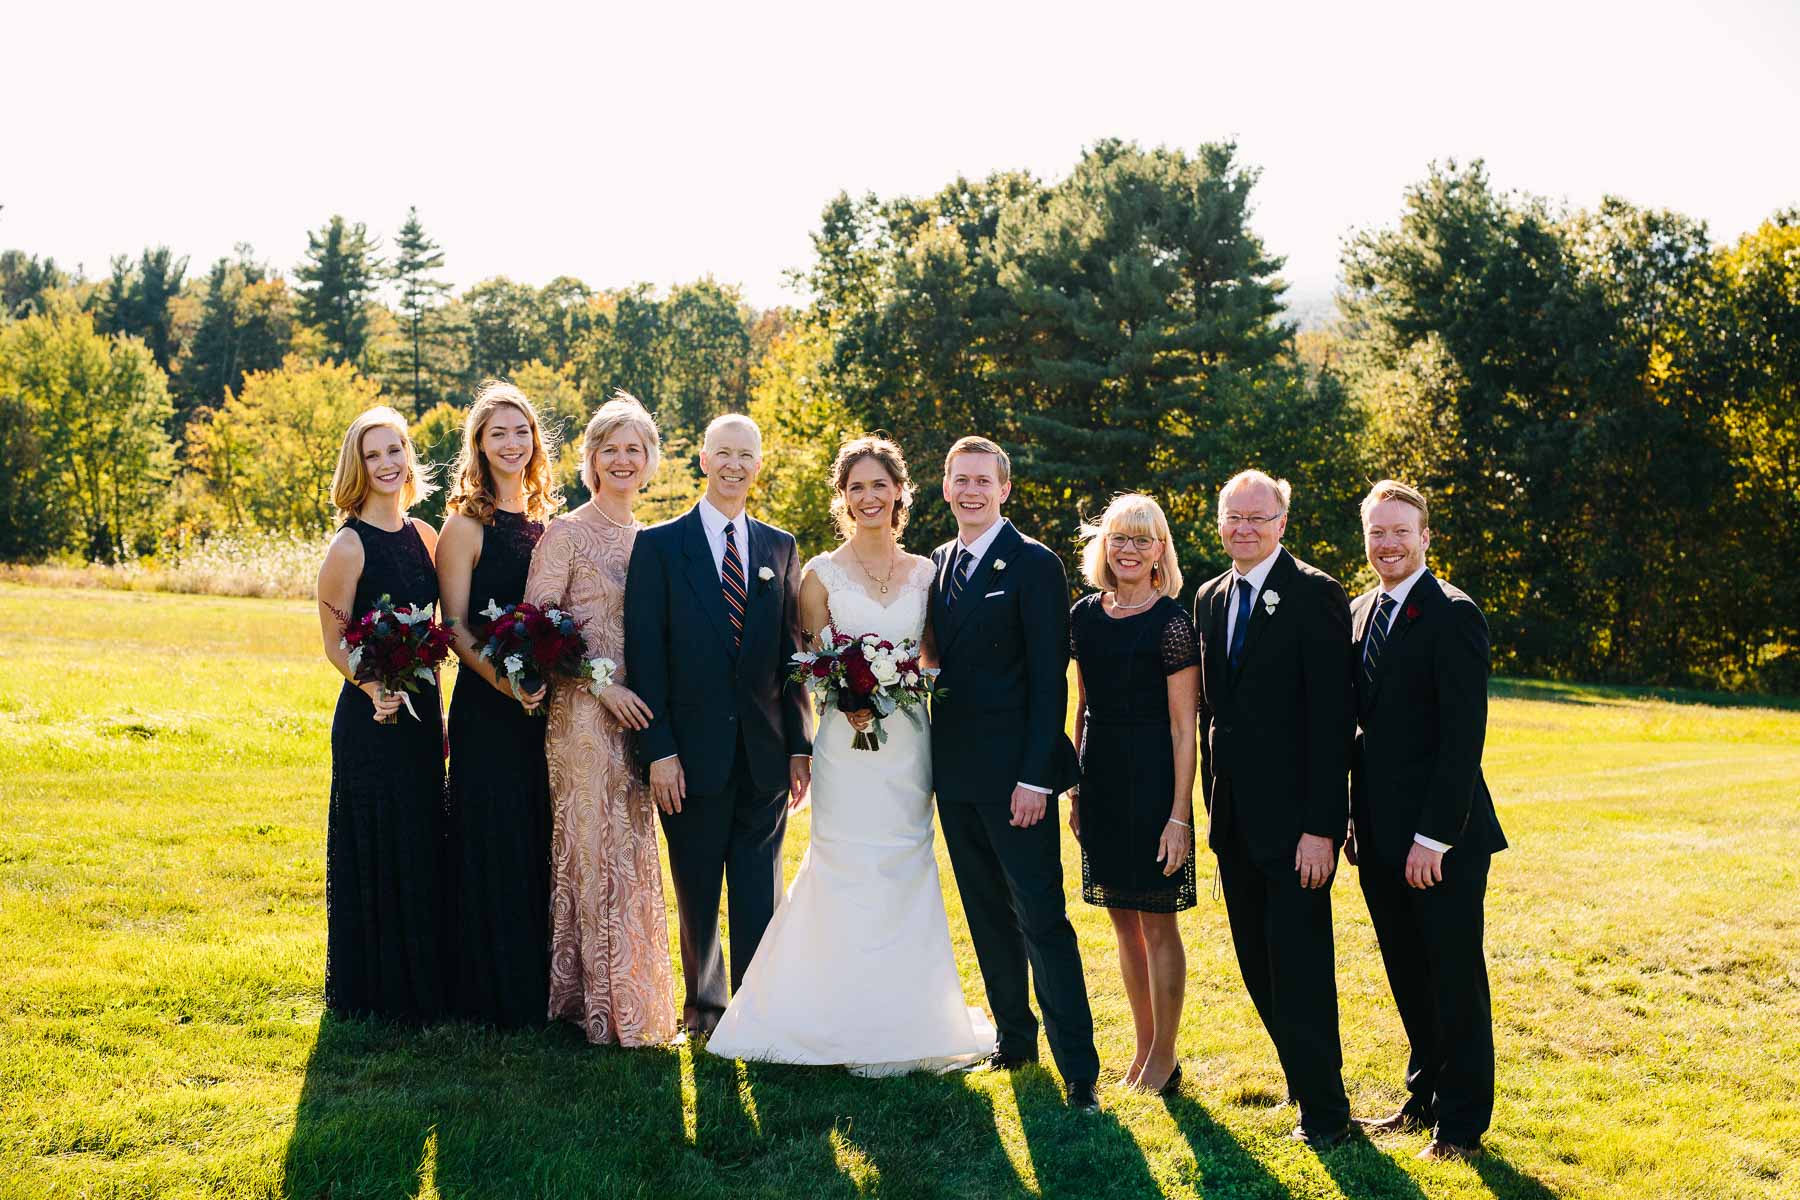 Fall wedding at Fruitlands Museum of Annelise and Niklas | Kelly Benvenuto Photography | Boston wedding photographer